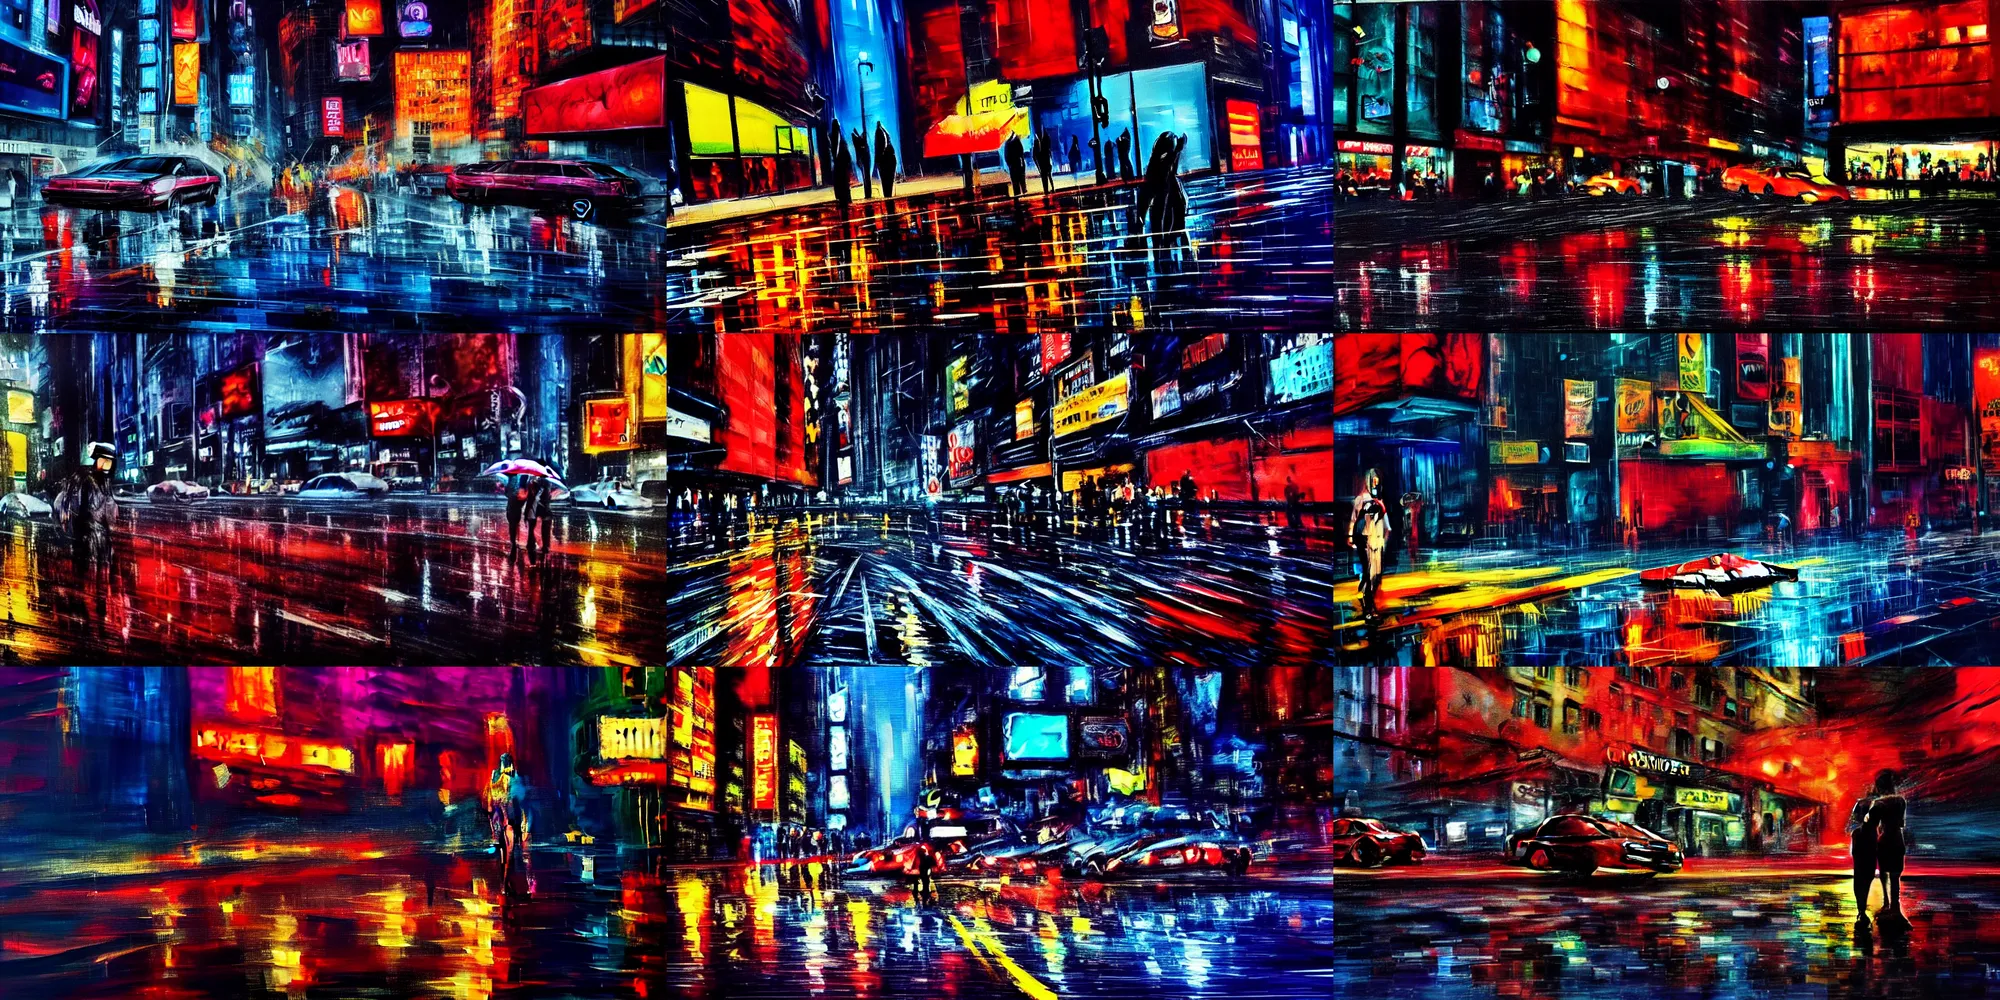 Prompt: small fish lying on the big streets of new york. trying to catch breath. after midnight, rain. epic futuristic scene, neon lights. tired, beaten city. neo noir style, rain, oil, blood everywhere, dramatic high contrast lighting. high action! acrylic painting, layered impasto, heavy gesture style. sad scene.